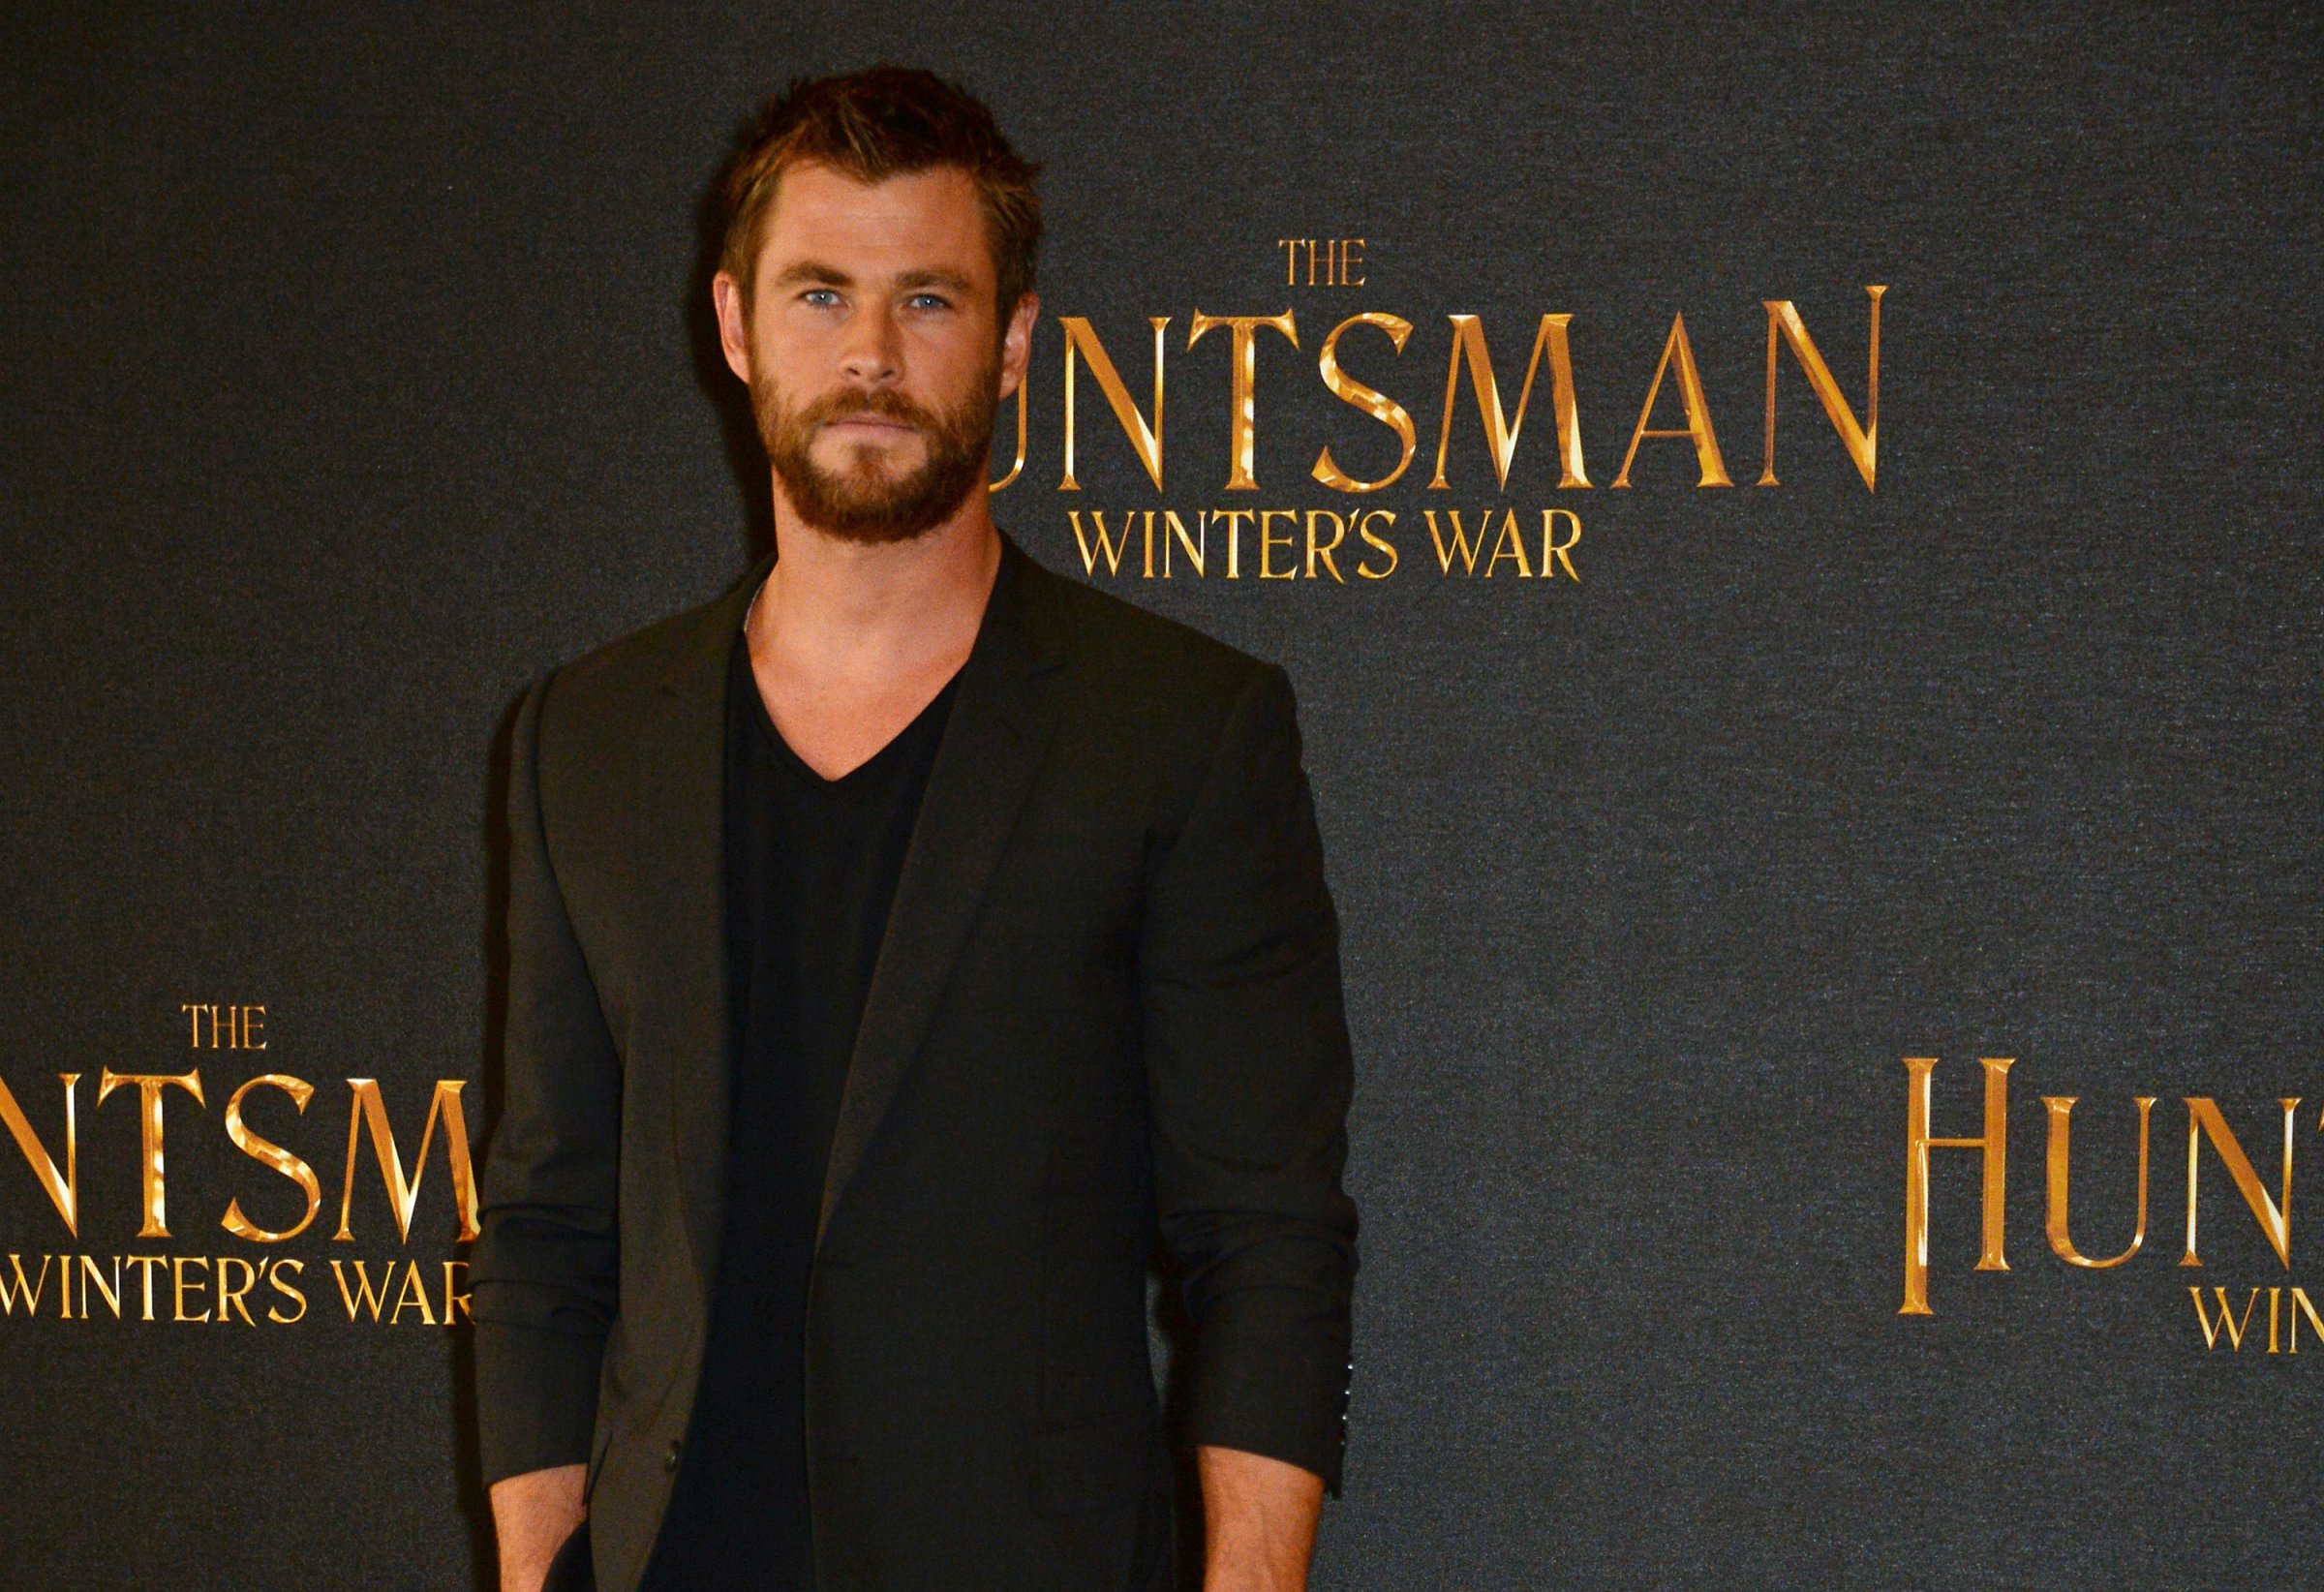 Chris Hemsworth poses at a photocall for 'The Huntsman: Winter's War' at Claridges Hotel on March 31, 2016 in London, England.